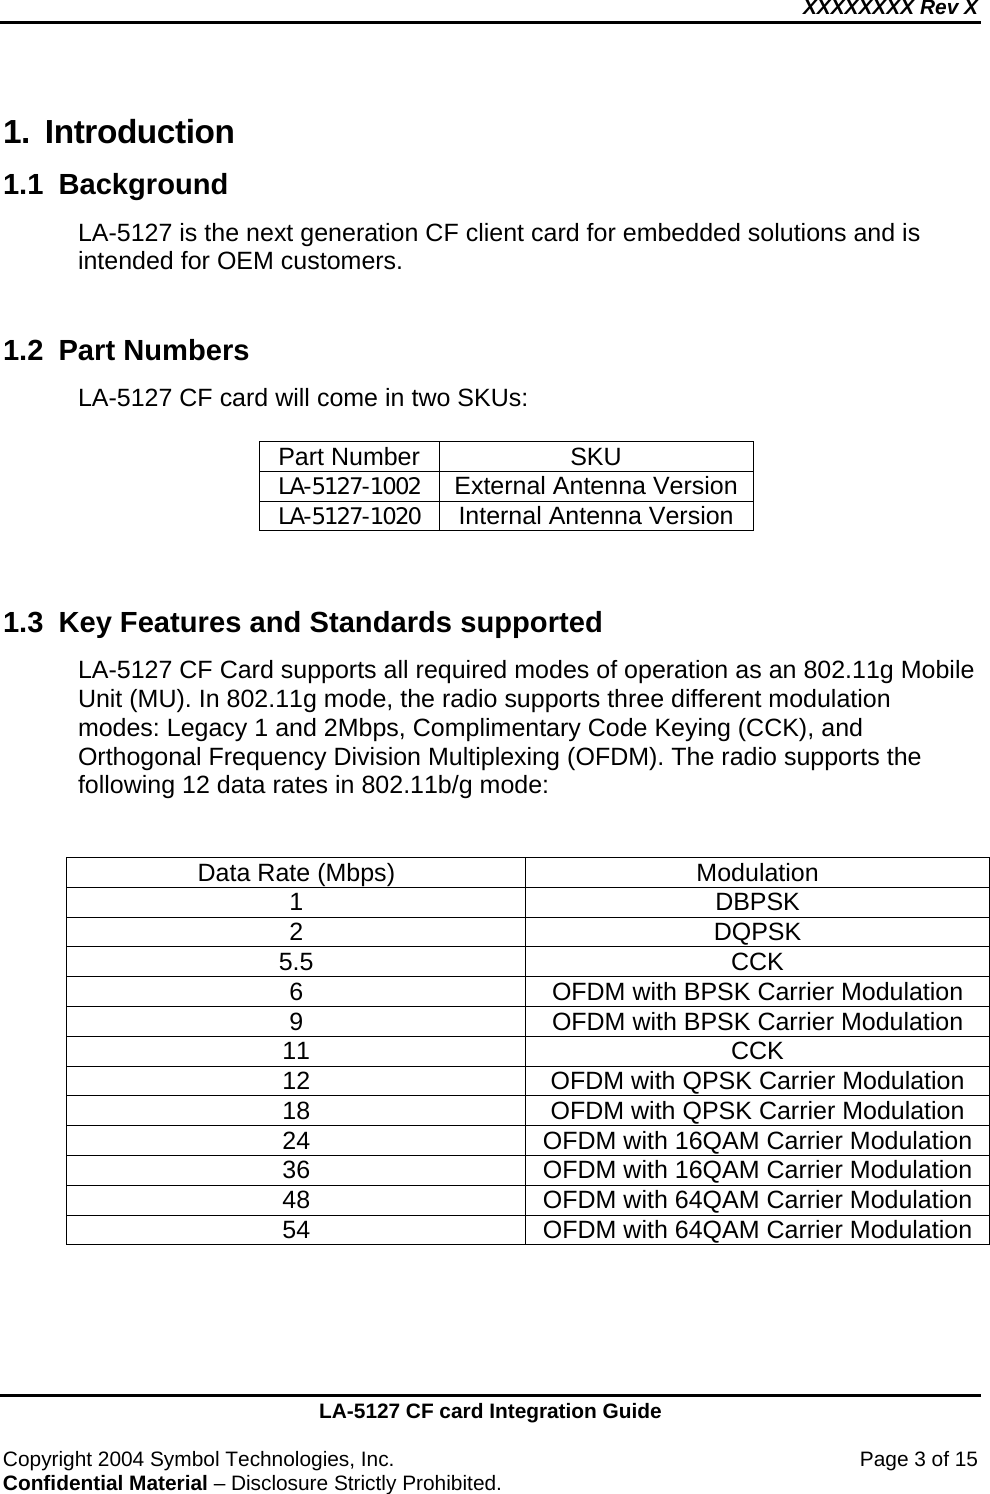 XXXXXXXX Rev X    LA-5127 CF card Integration Guide  Copyright 2004 Symbol Technologies, Inc.    Page 3 of 15 Confidential Material – Disclosure Strictly Prohibited. 1. Introduction 1.1 Background  LA-5127 is the next generation CF client card for embedded solutions and is intended for OEM customers.  1.2  Part Numbers  LA-5127 CF card will come in two SKUs:  Part Number  SKU LA-5127-1002 External Antenna Version LA-5127-1020  Internal Antenna Version   1.3  Key Features and Standards supported LA-5127 CF Card supports all required modes of operation as an 802.11g Mobile Unit (MU). In 802.11g mode, the radio supports three different modulation modes: Legacy 1 and 2Mbps, Complimentary Code Keying (CCK), and Orthogonal Frequency Division Multiplexing (OFDM). The radio supports the following 12 data rates in 802.11b/g mode:   Data Rate (Mbps)  Modulation 1 DBPSK 2 DQPSK 5.5 CCK 6  OFDM with BPSK Carrier Modulation 9  OFDM with BPSK Carrier Modulation 11 CCK 12  OFDM with QPSK Carrier Modulation 18  OFDM with QPSK Carrier Modulation 24  OFDM with 16QAM Carrier Modulation 36  OFDM with 16QAM Carrier Modulation 48  OFDM with 64QAM Carrier Modulation 54  OFDM with 64QAM Carrier Modulation   